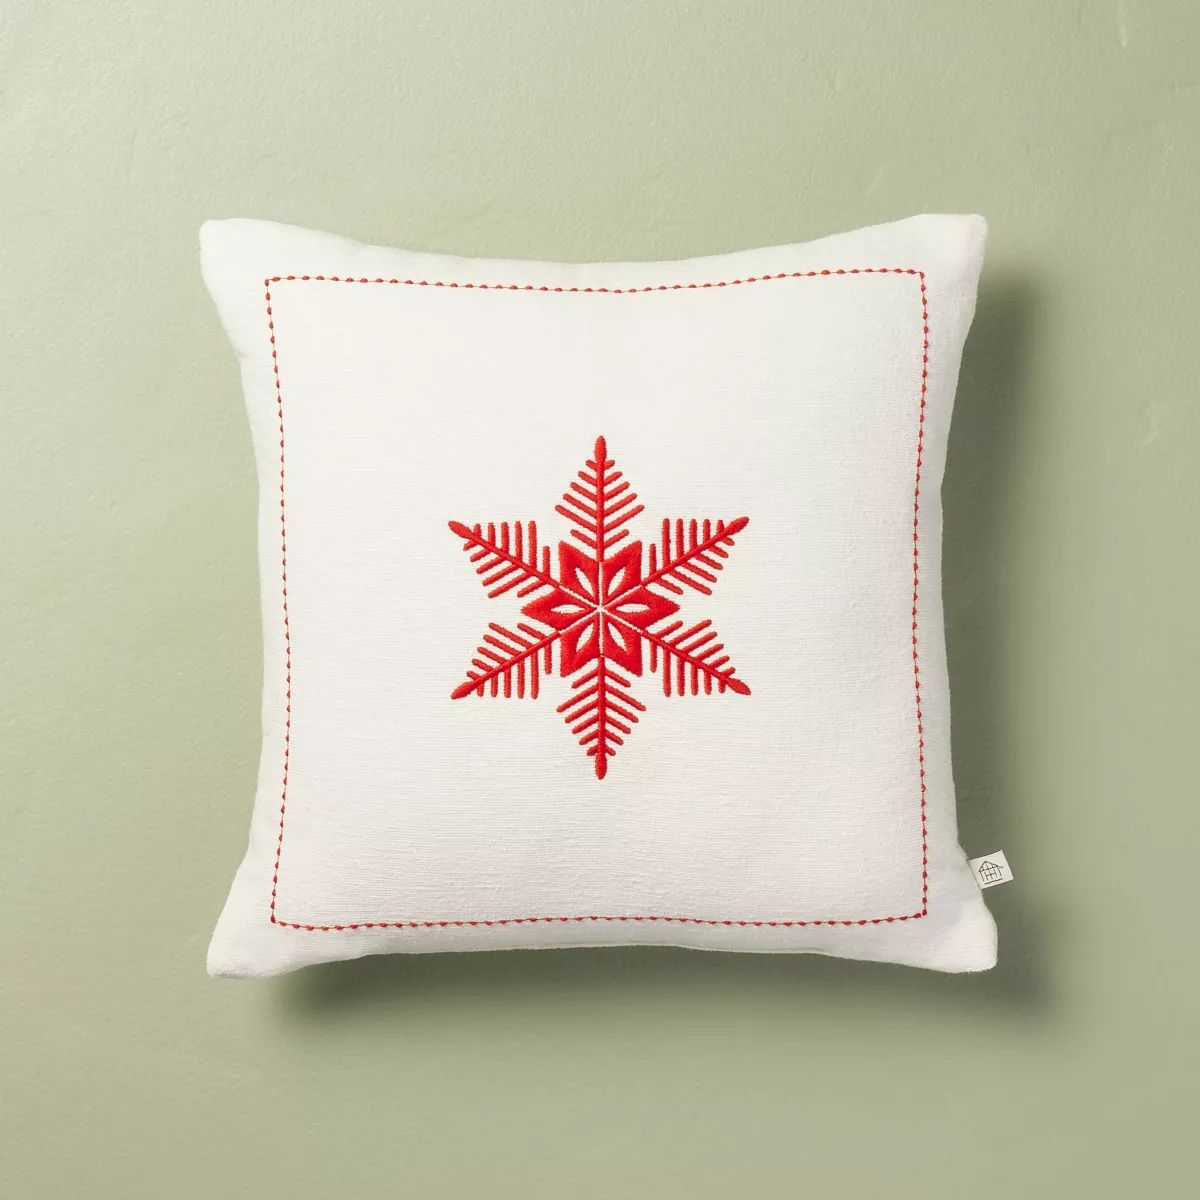 14"x14" Embroidered Snowflake Square Throw Pillow Cream/Red - Hearth & Hand™ with Magnolia | Target